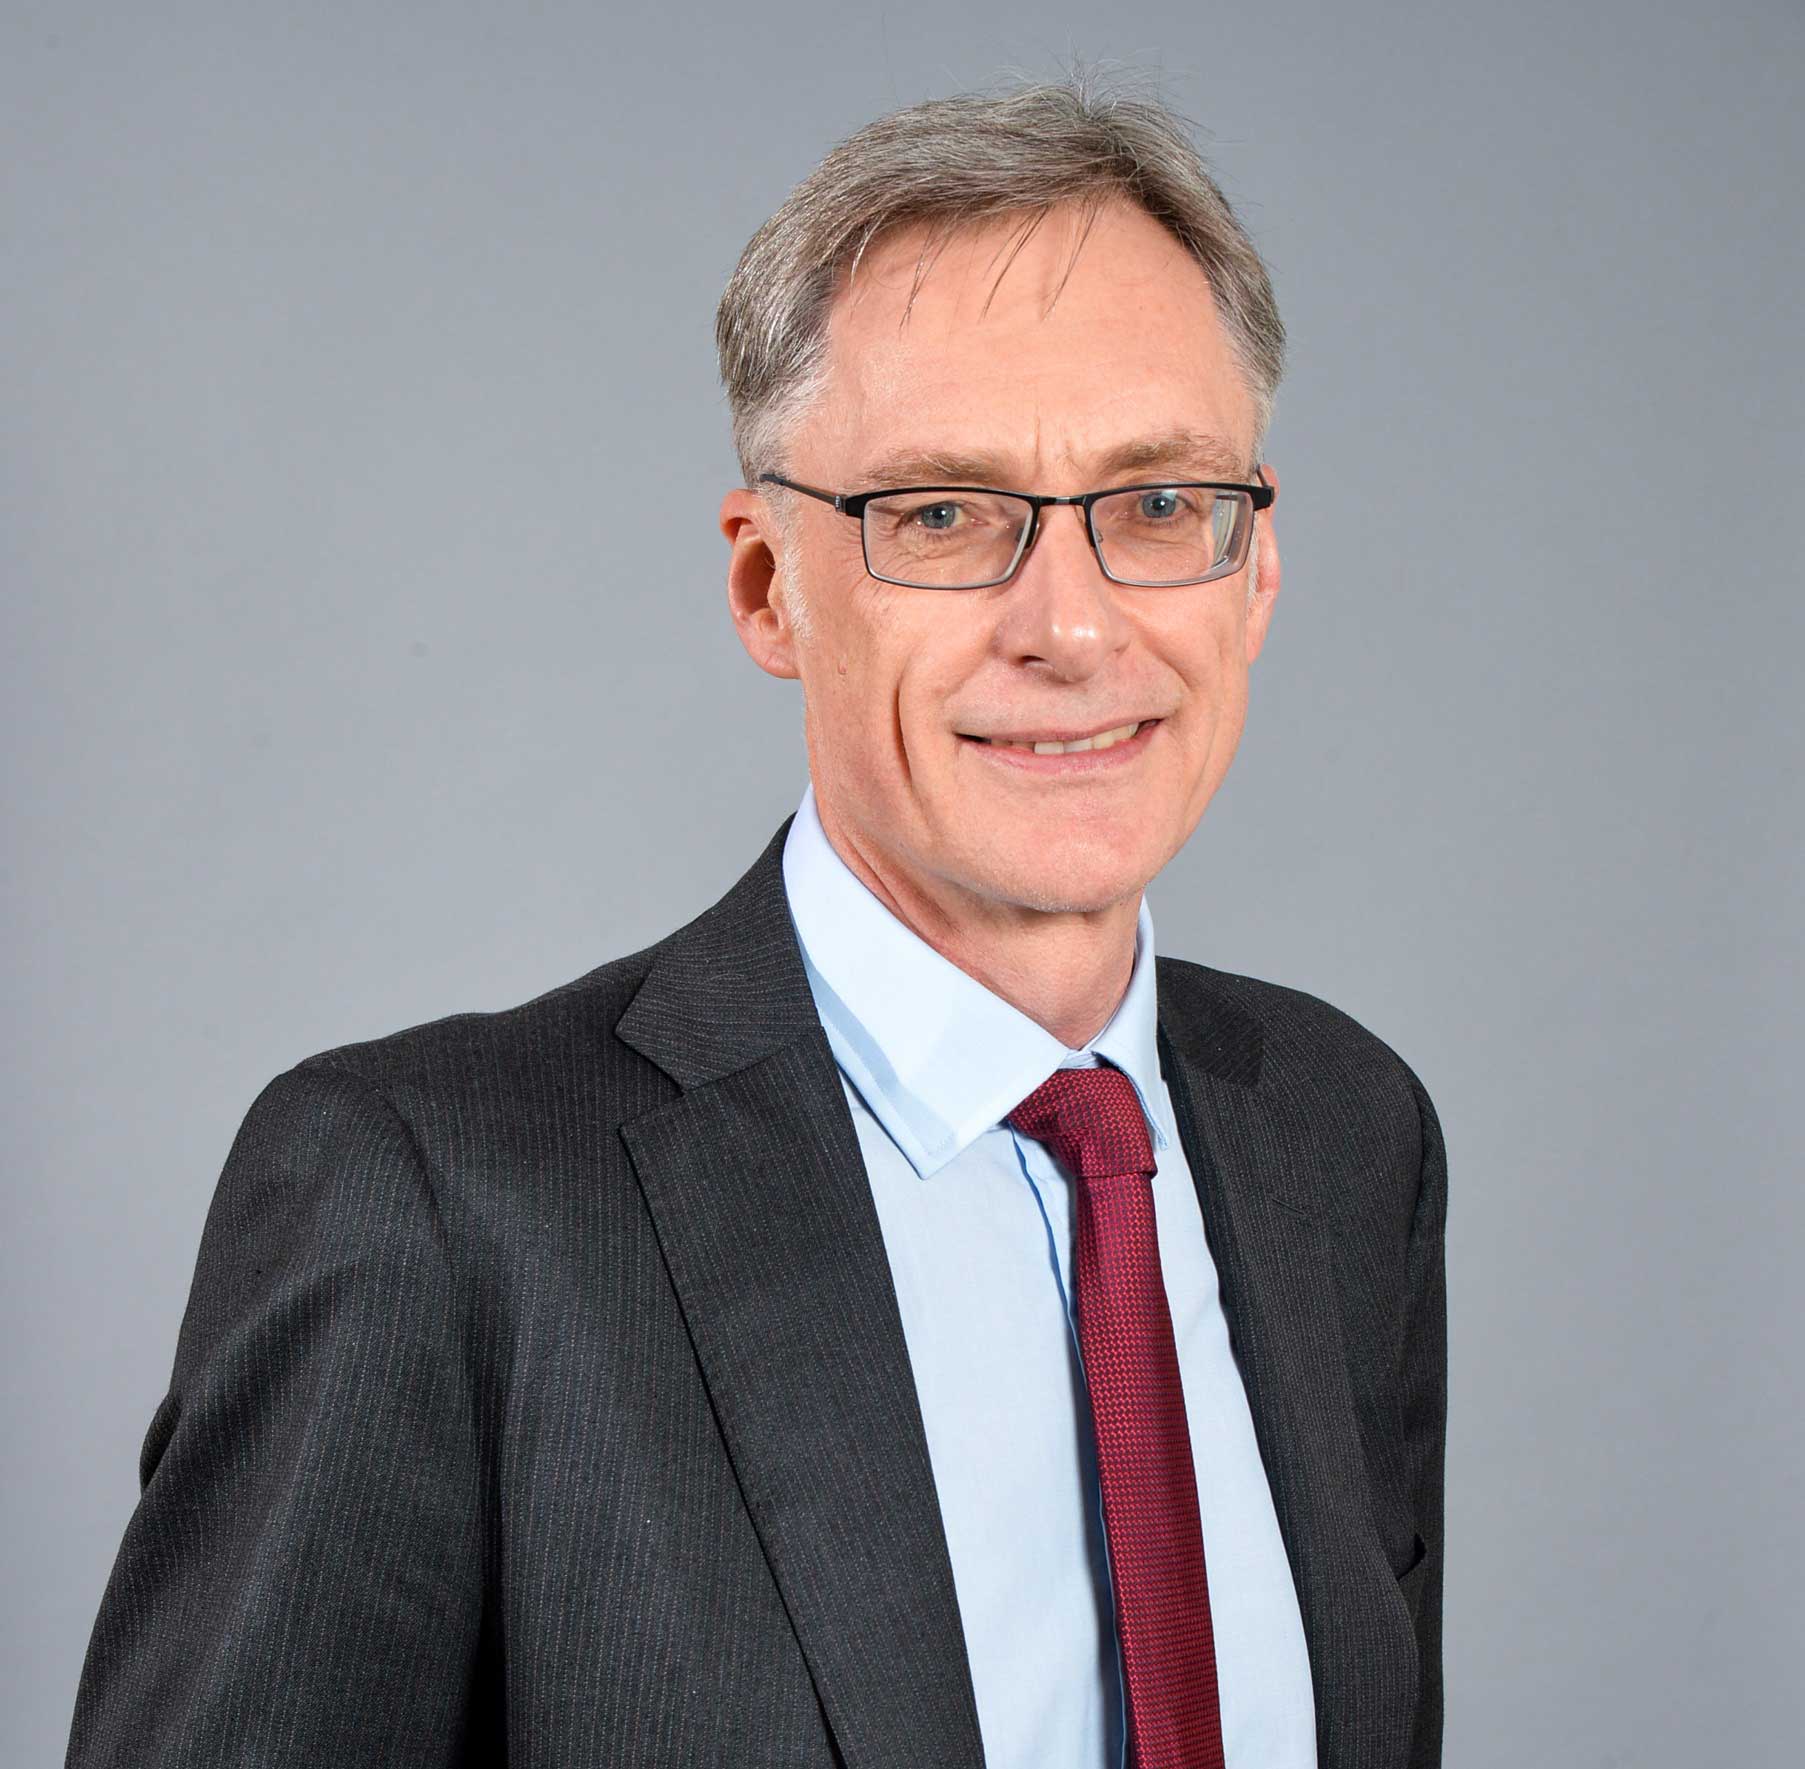 Jonathan Oxley is Chair of law firm Lupton Fawcett